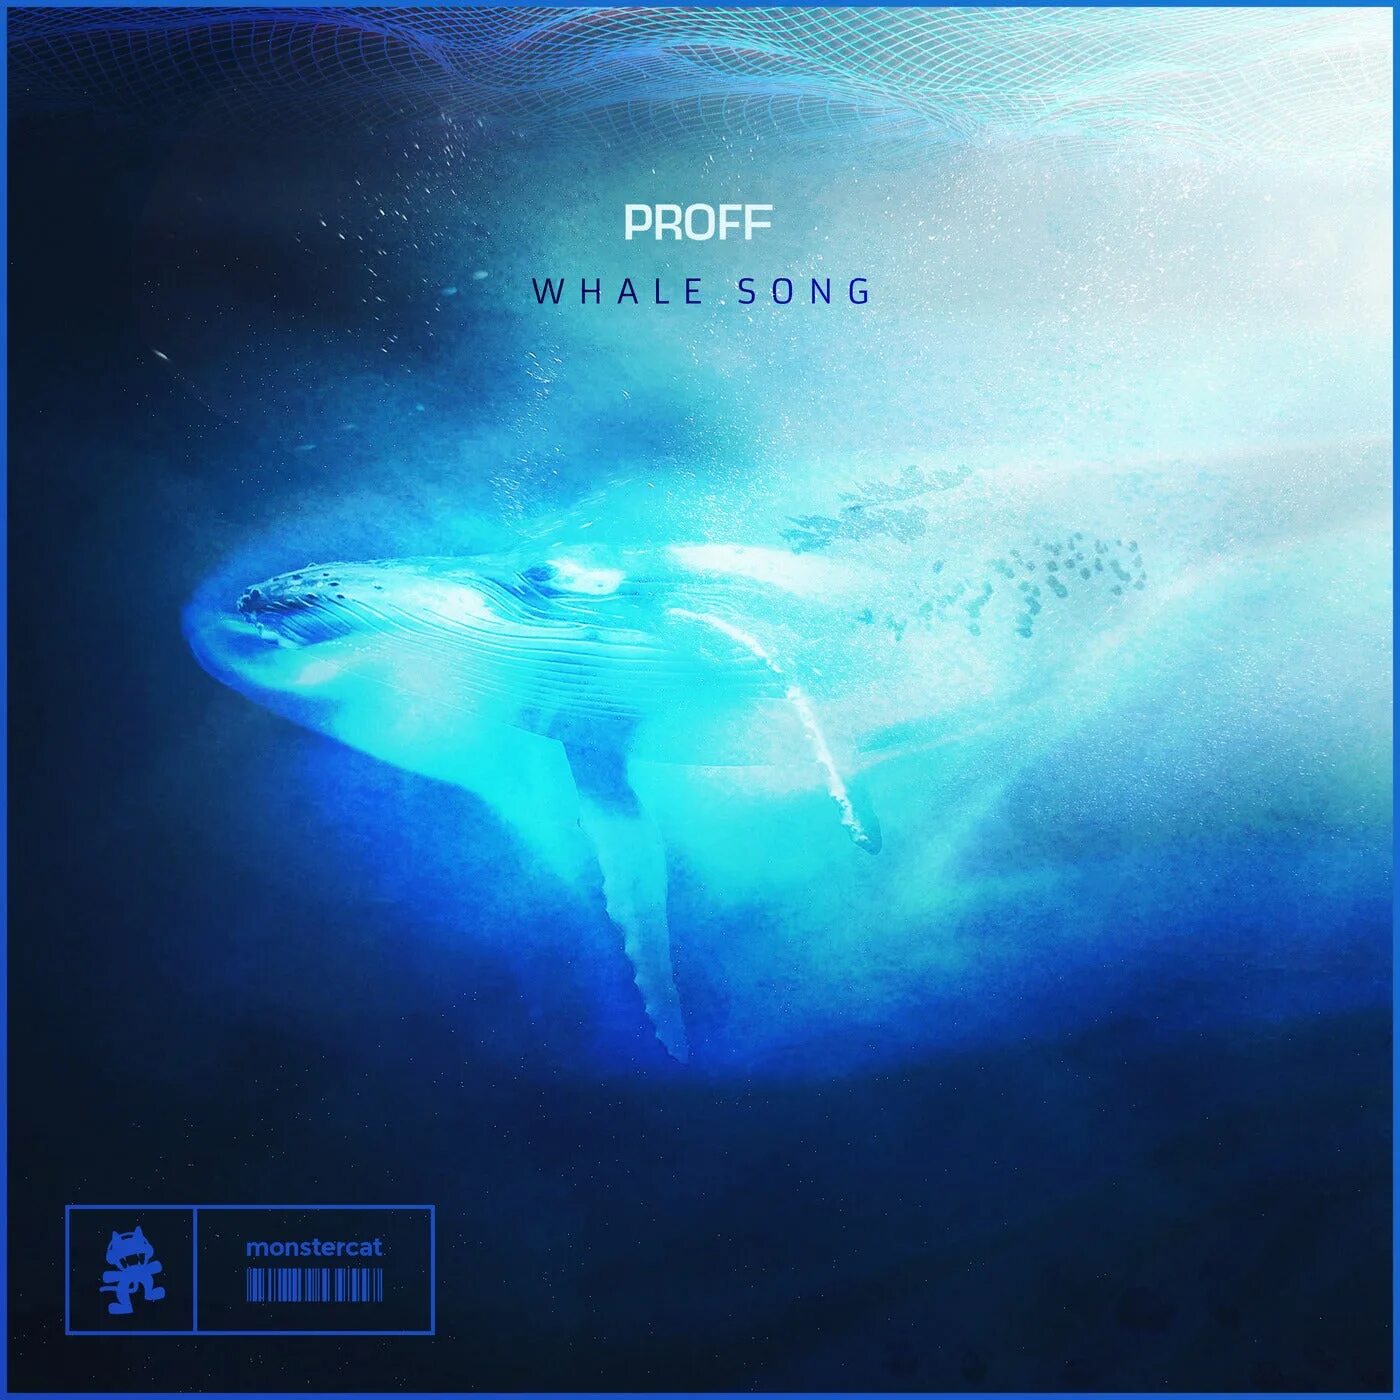 Extended songs. Whale Song. Long Whale Song. Небеса альбом синие киты. The Polos Whale Song.